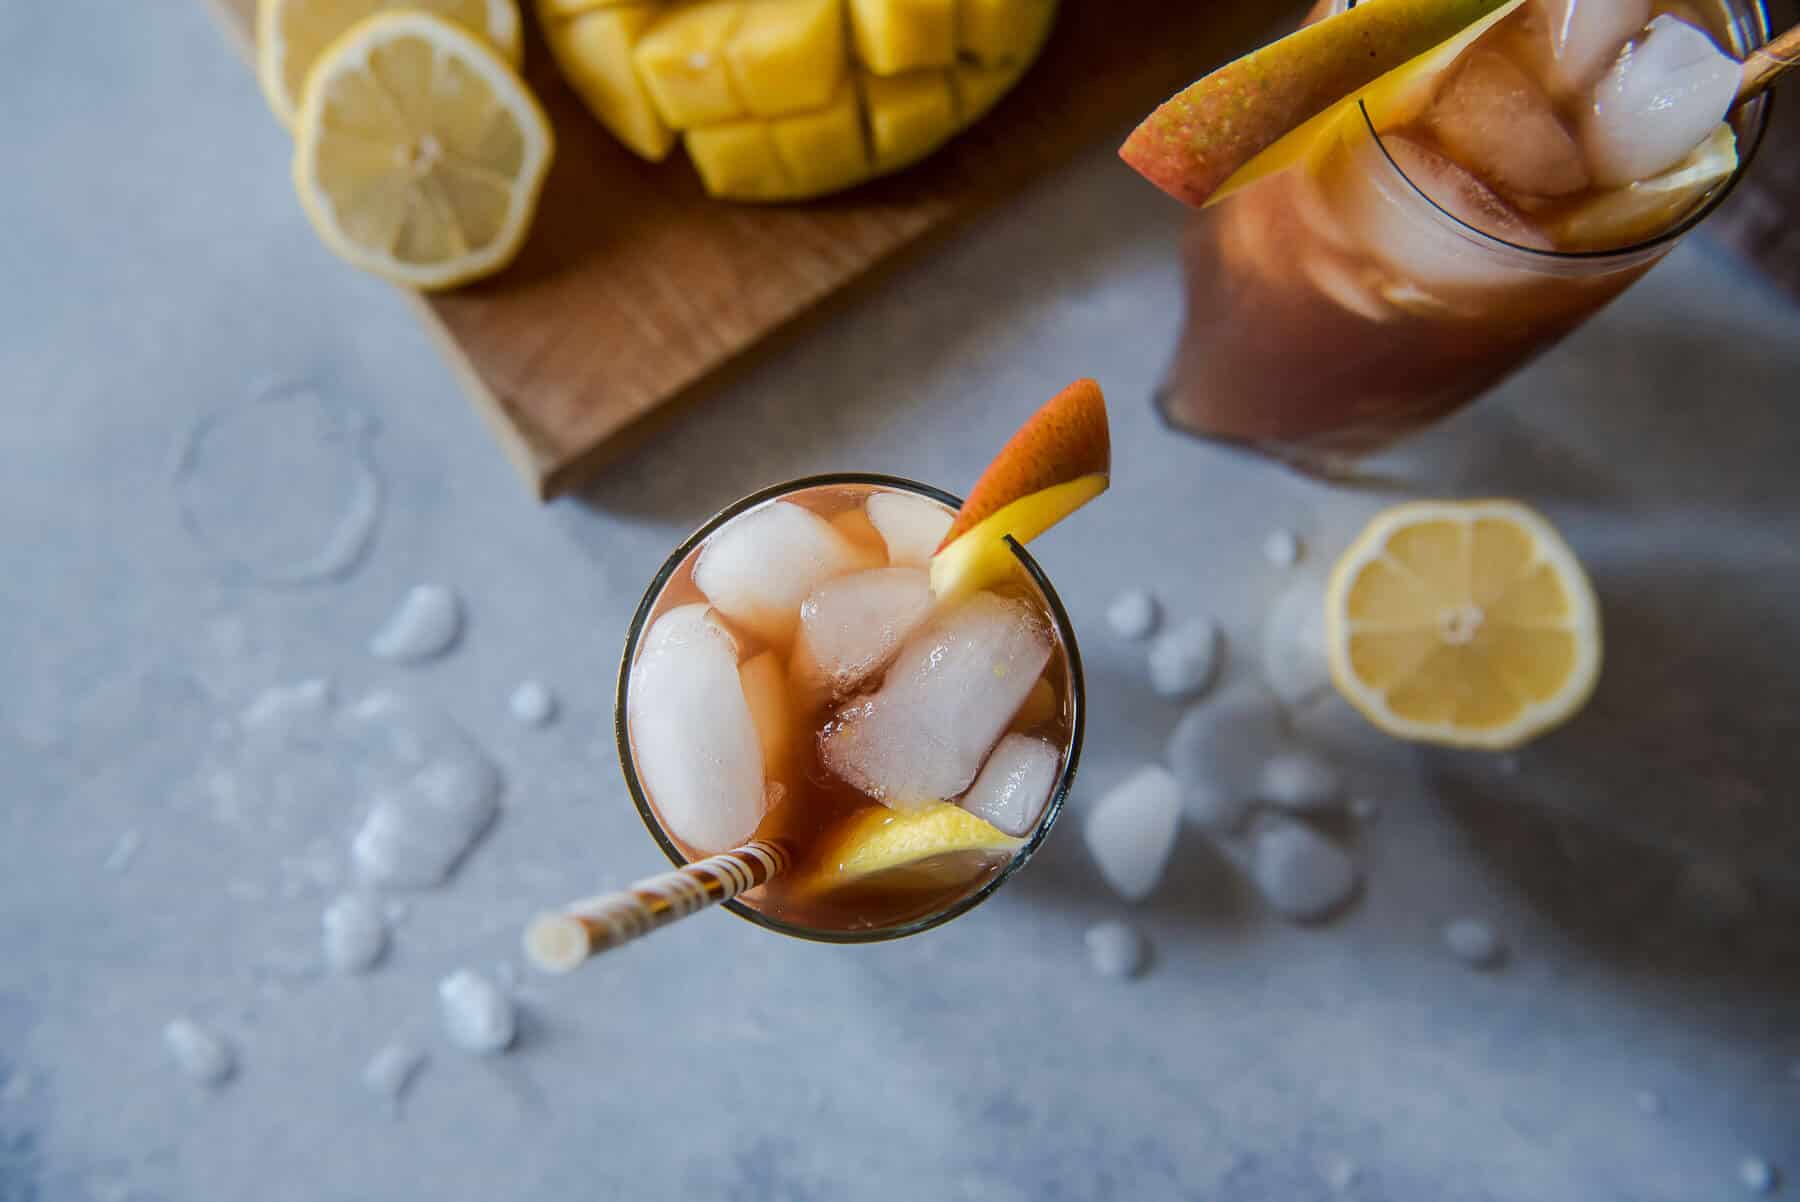 Change up your brunch beverage game with this Southern Spiked Mango Iced Tea! Arnold Palmer-style lemon iced tea combined with homemade mango nectar and a shot of your favorite bourbon is a tasty tropical, Southern way to cool down a balmy morning meal.